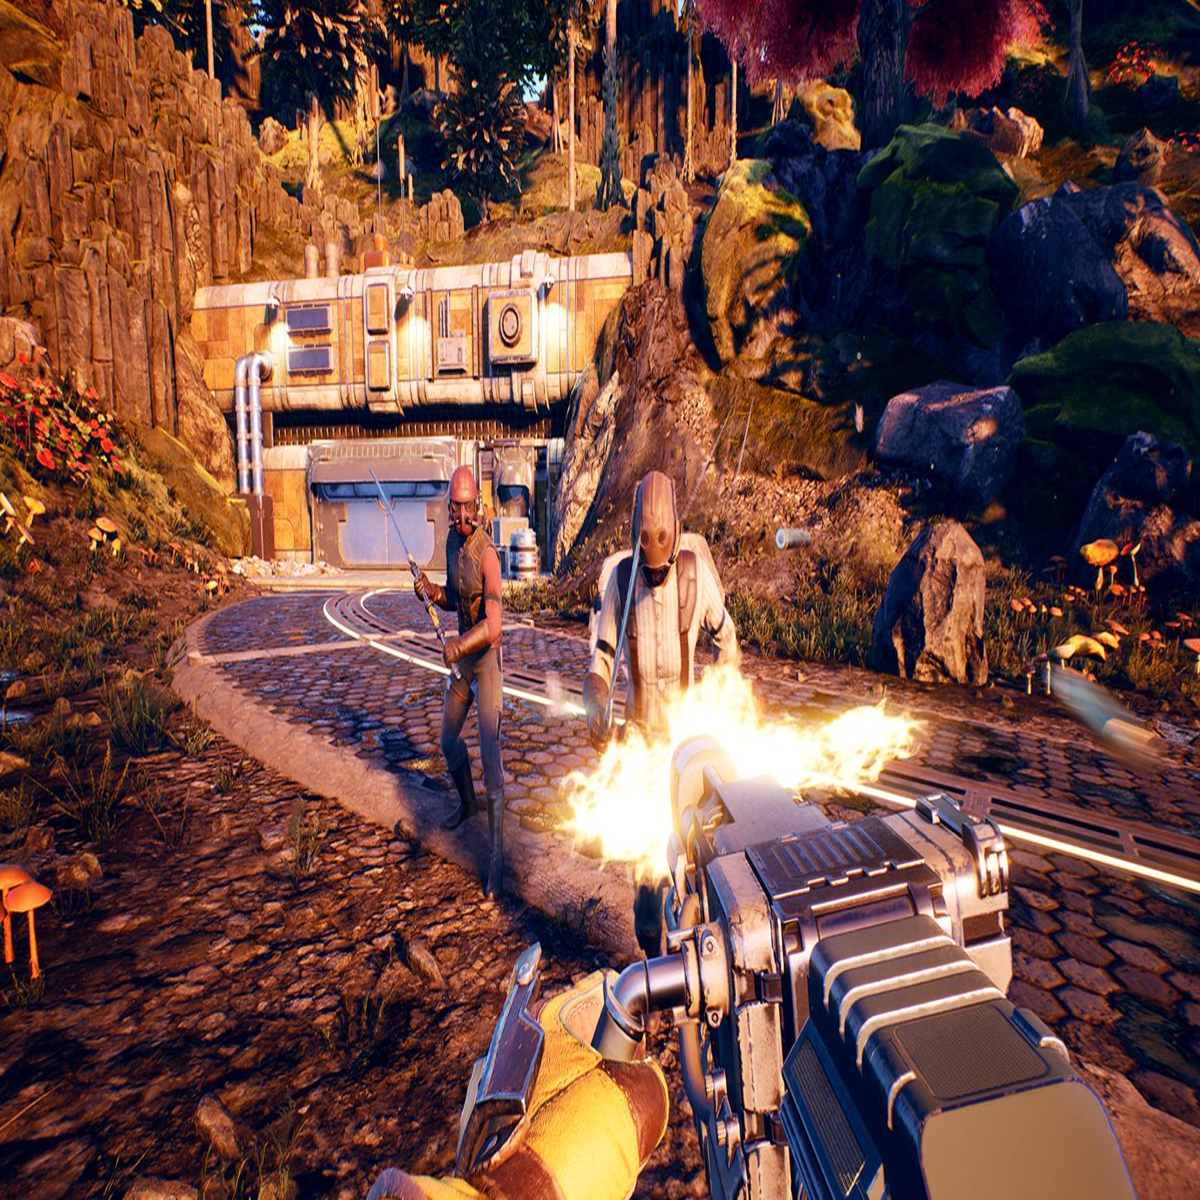 The Outer Worlds Gameplay Revealed at E3 2019